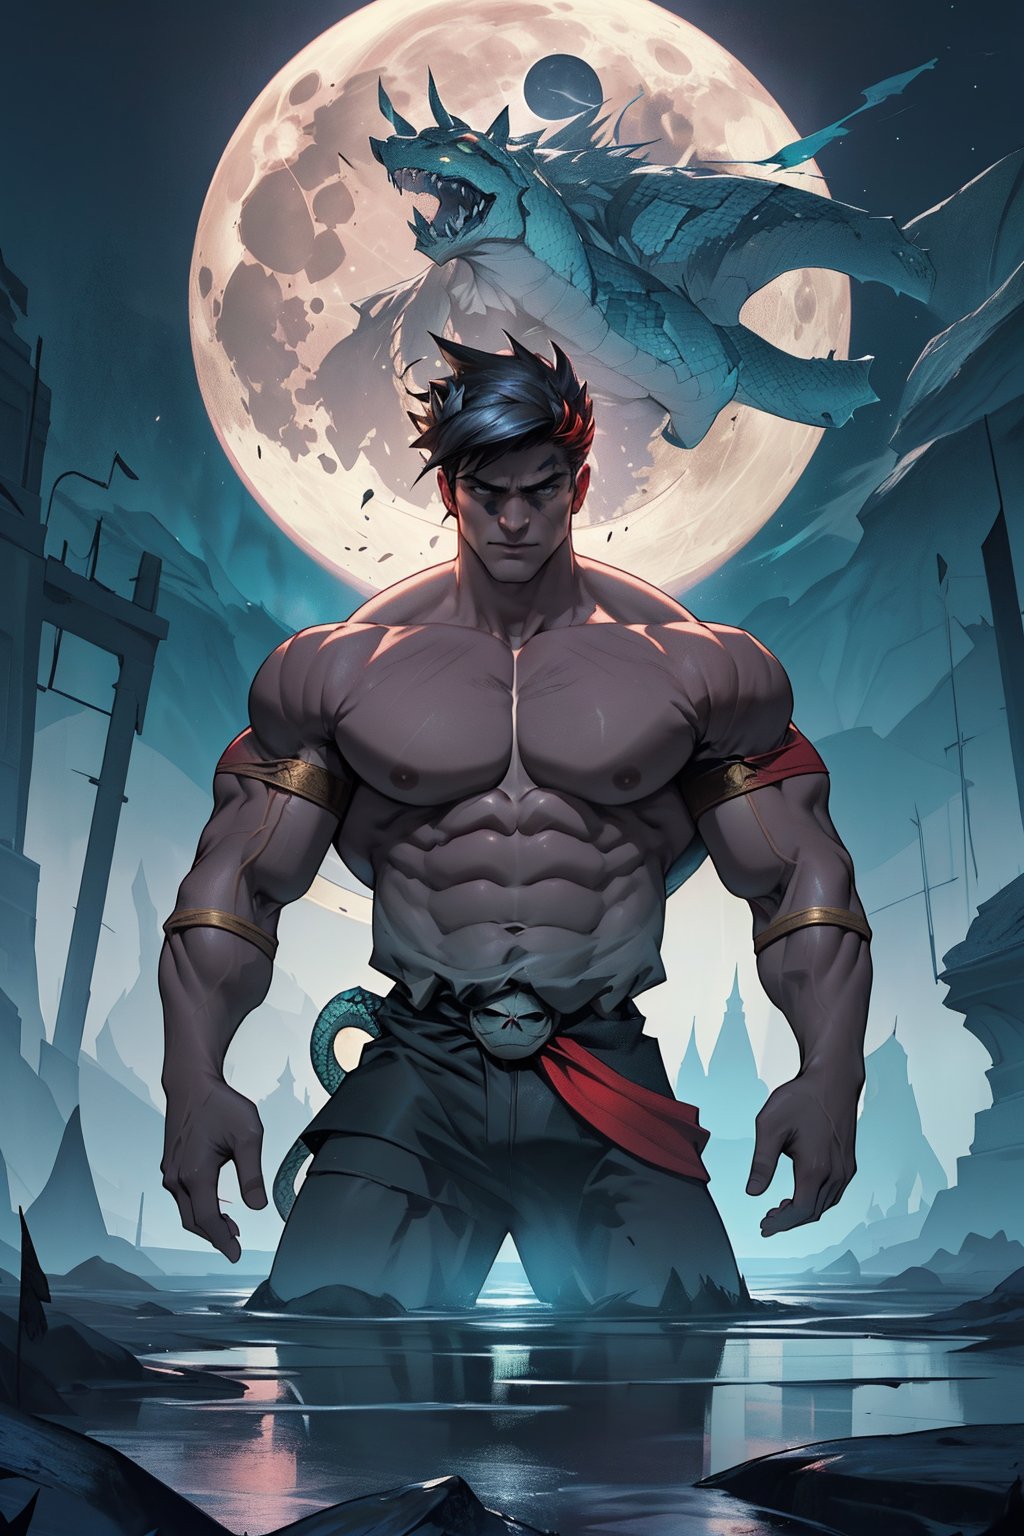 A darkened, eerie landscape serves as the backdrop for Zagreus, his imposing physique radiating power and menace. His massive muscles ripple beneath his skin as he flexes, veins bulging like snakes under the moon's pale light. The air is heavy with an otherworldly energy, as if the very fabric of reality trembles in response to his mighty form.